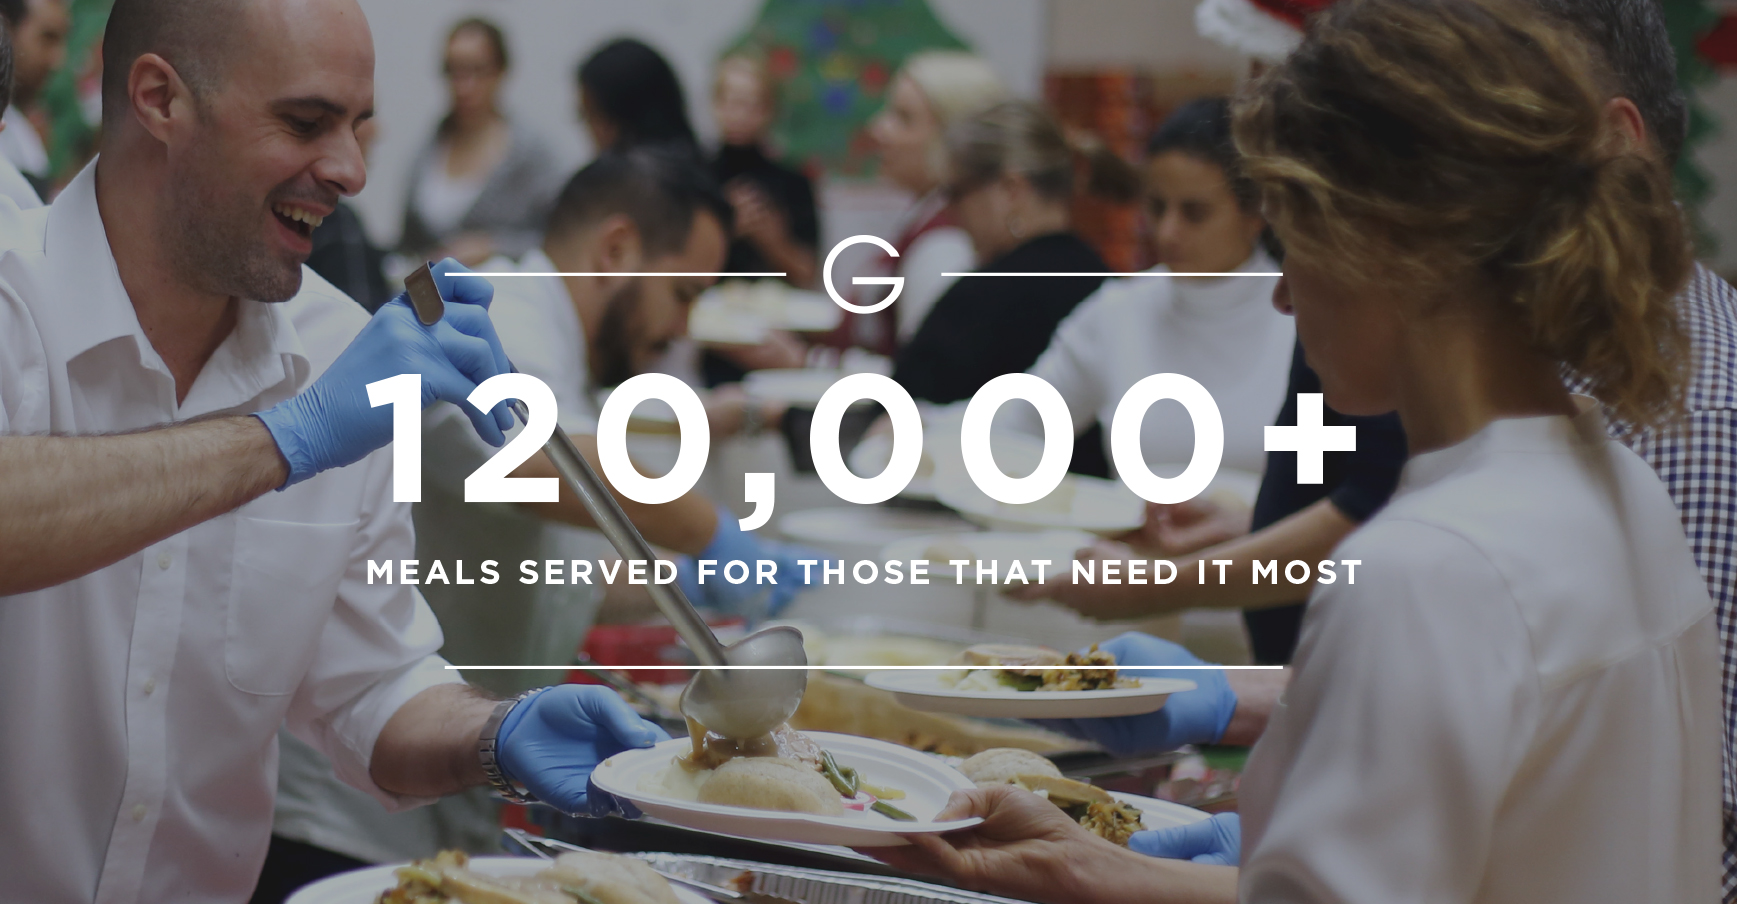 120,000+ MEALS SERVED FOR THOSE THAT NEED IT MOST